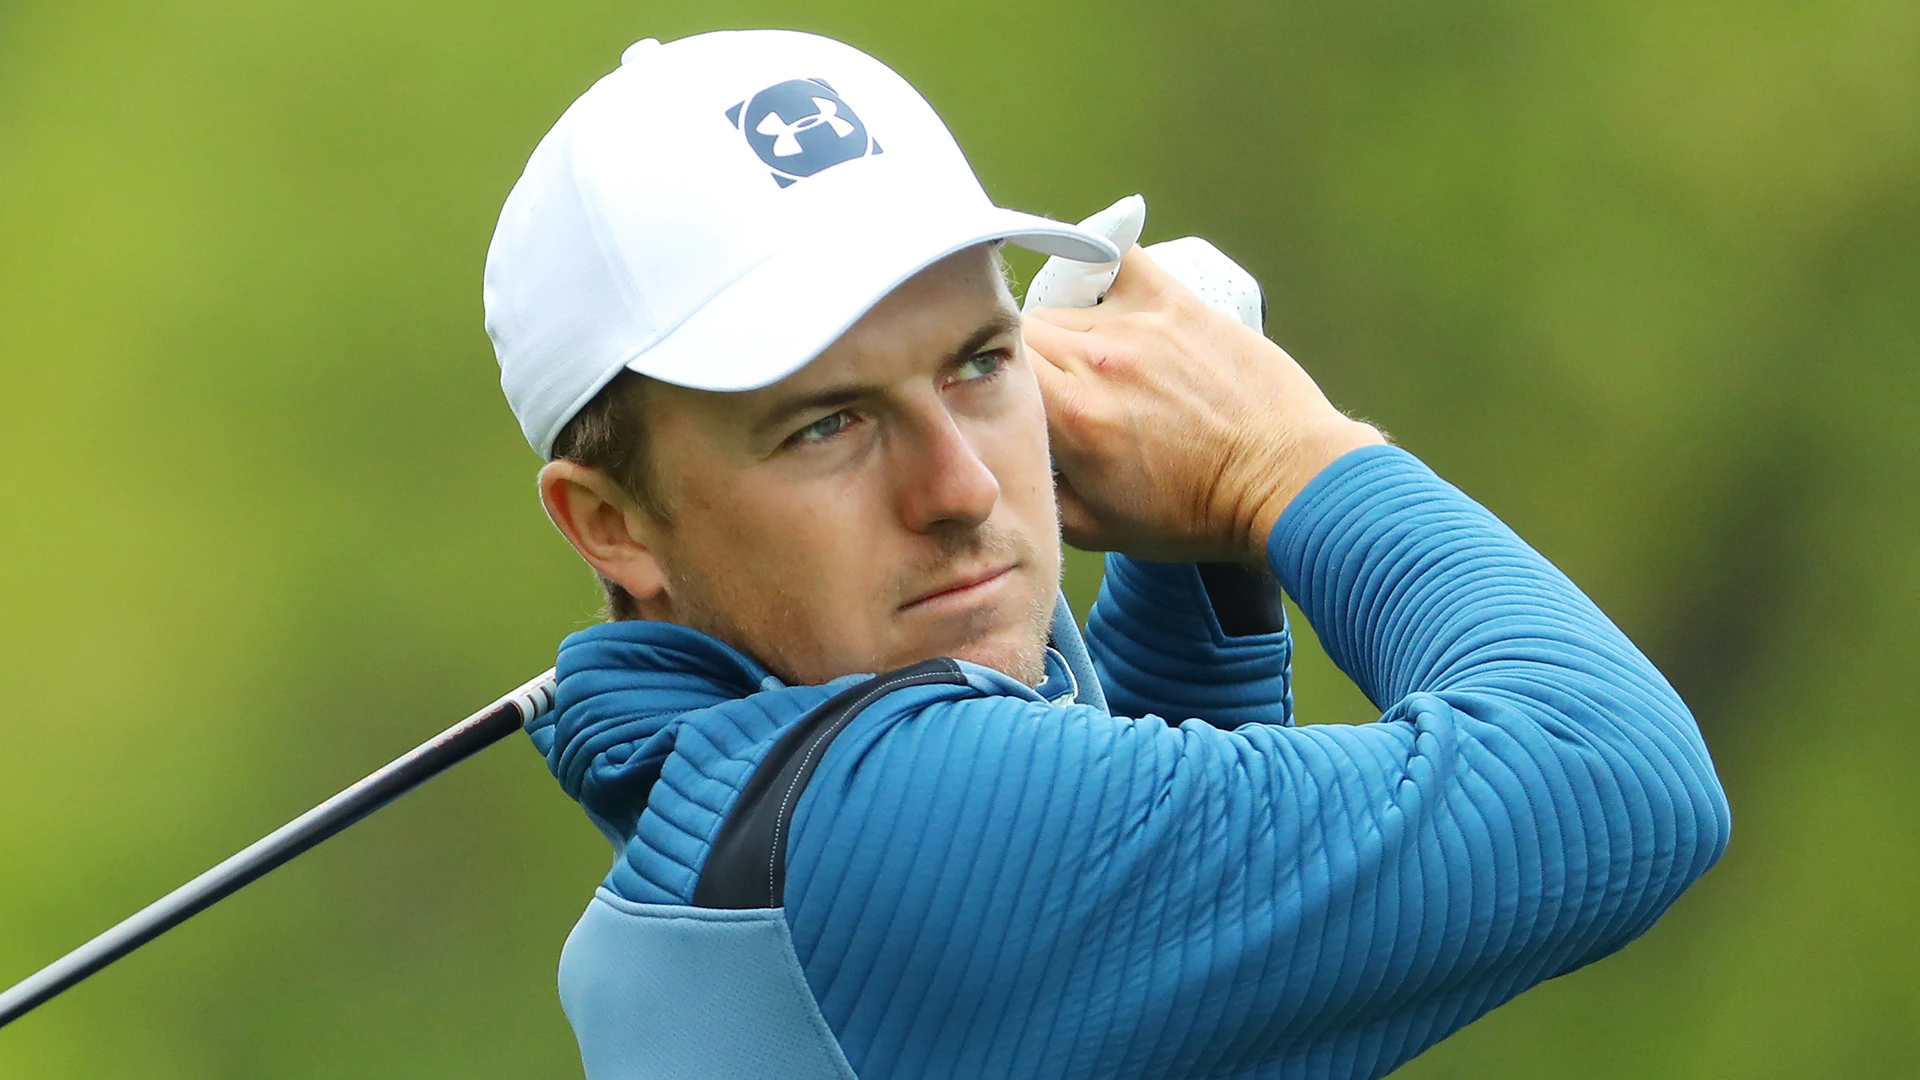 Spieth believes if he stays the course, the career Grand Slam will eventually come